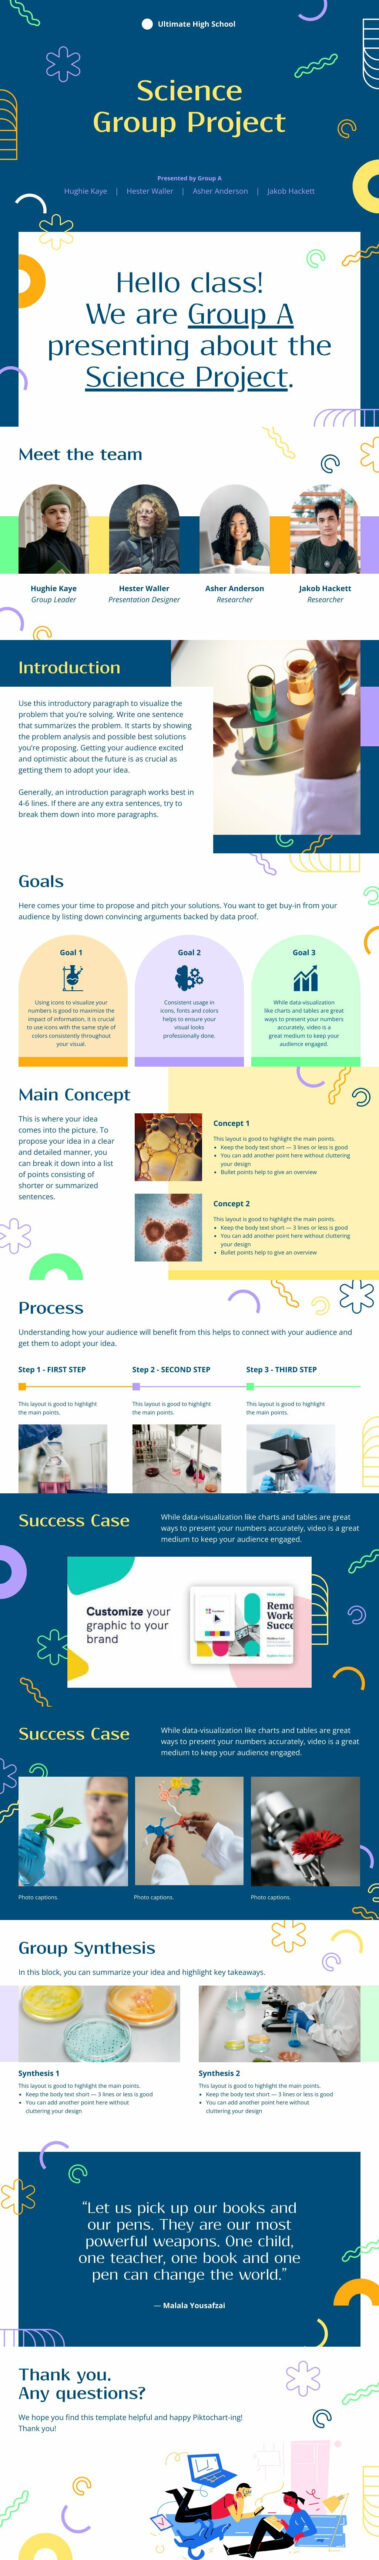 piktochart template of science group project